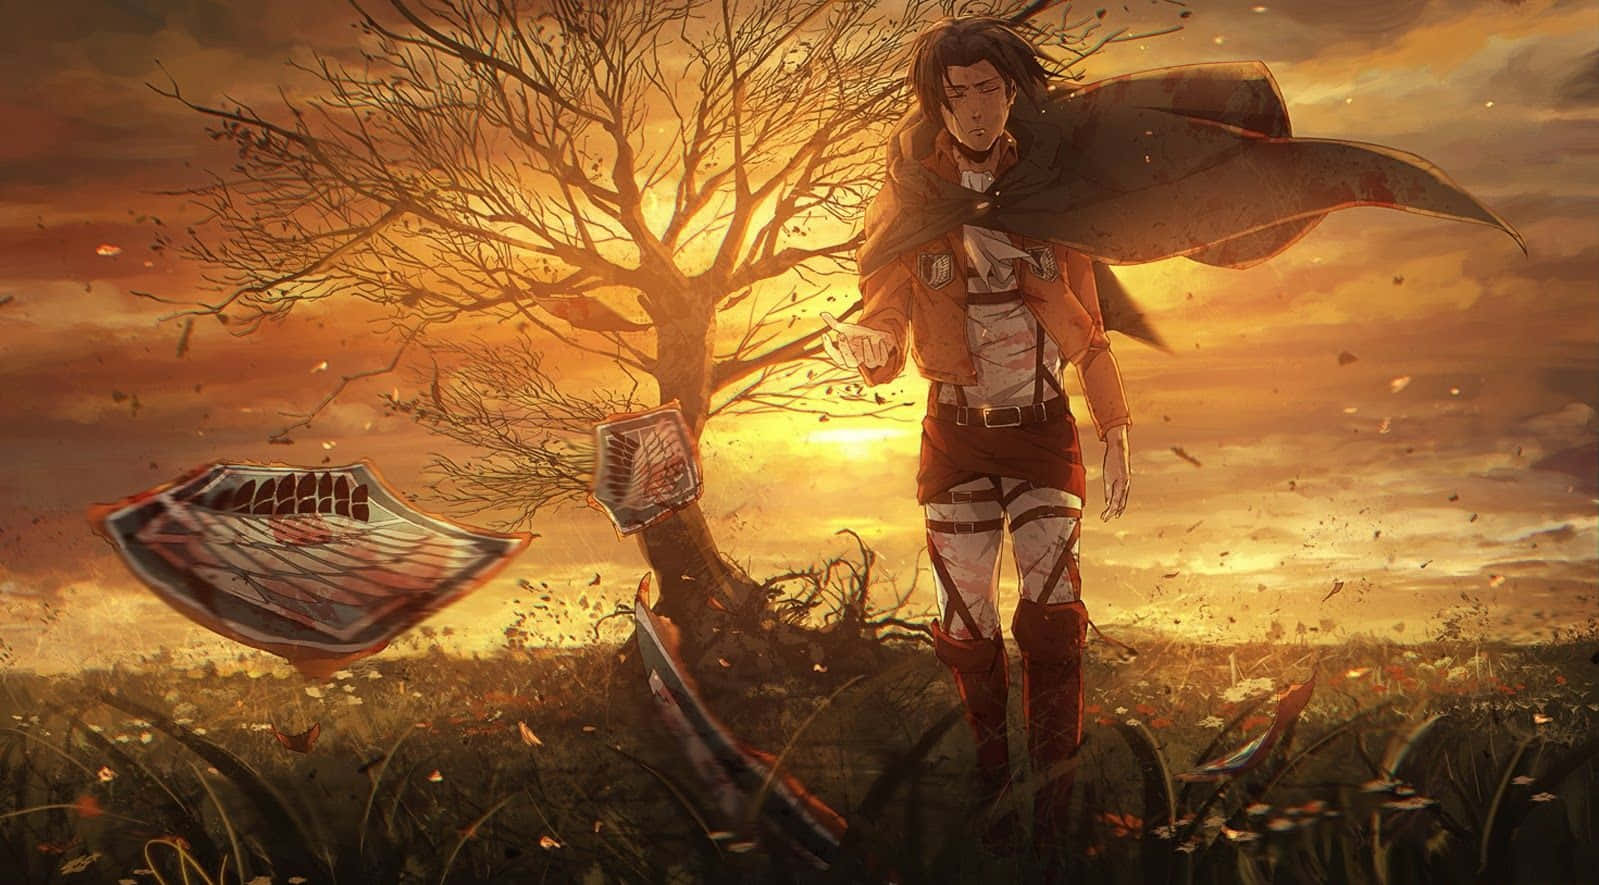 Join the Survey Corps and Become a Hero Wallpaper